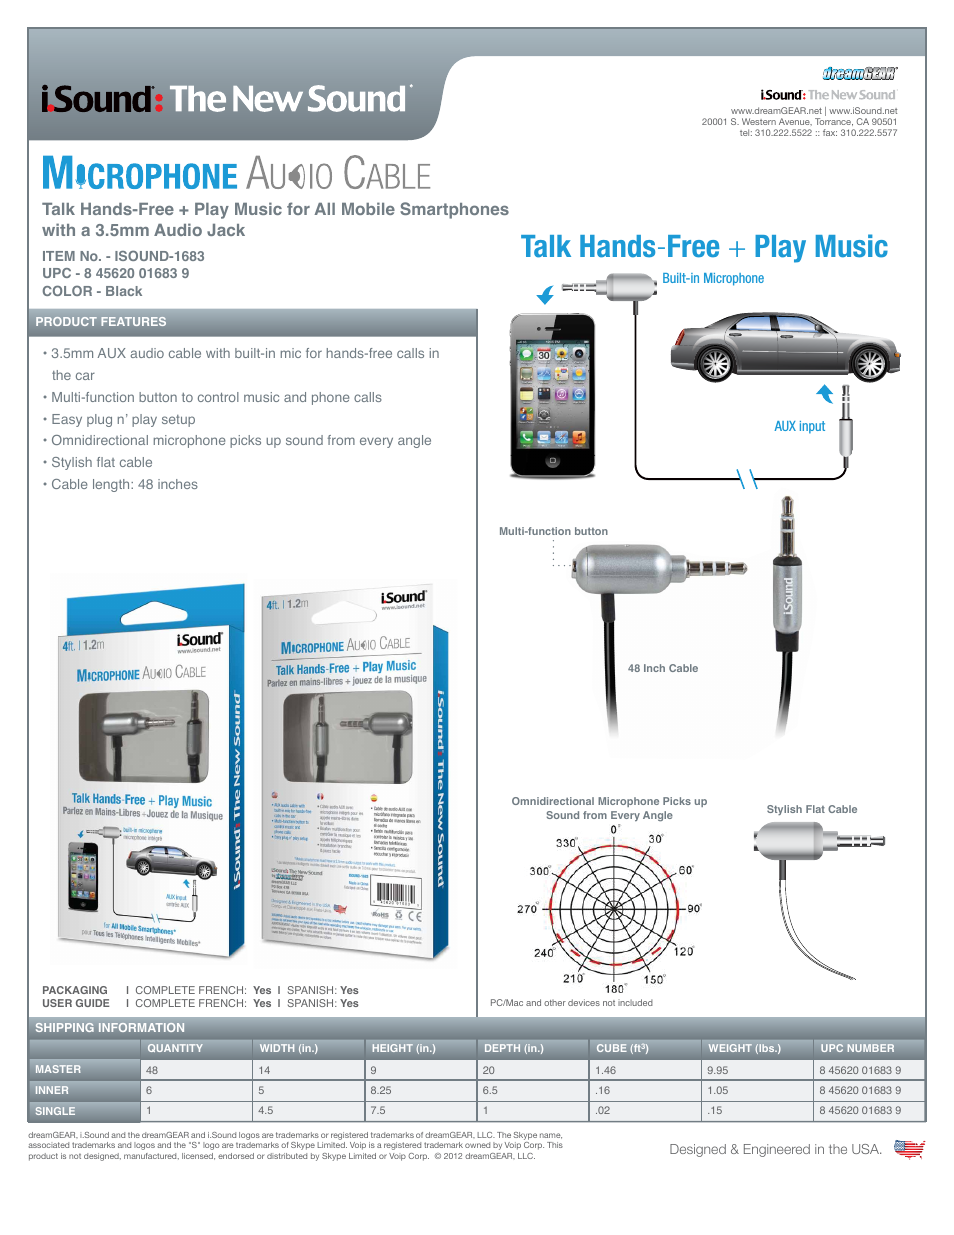 Microphone Audio Cable - Sell Sheet